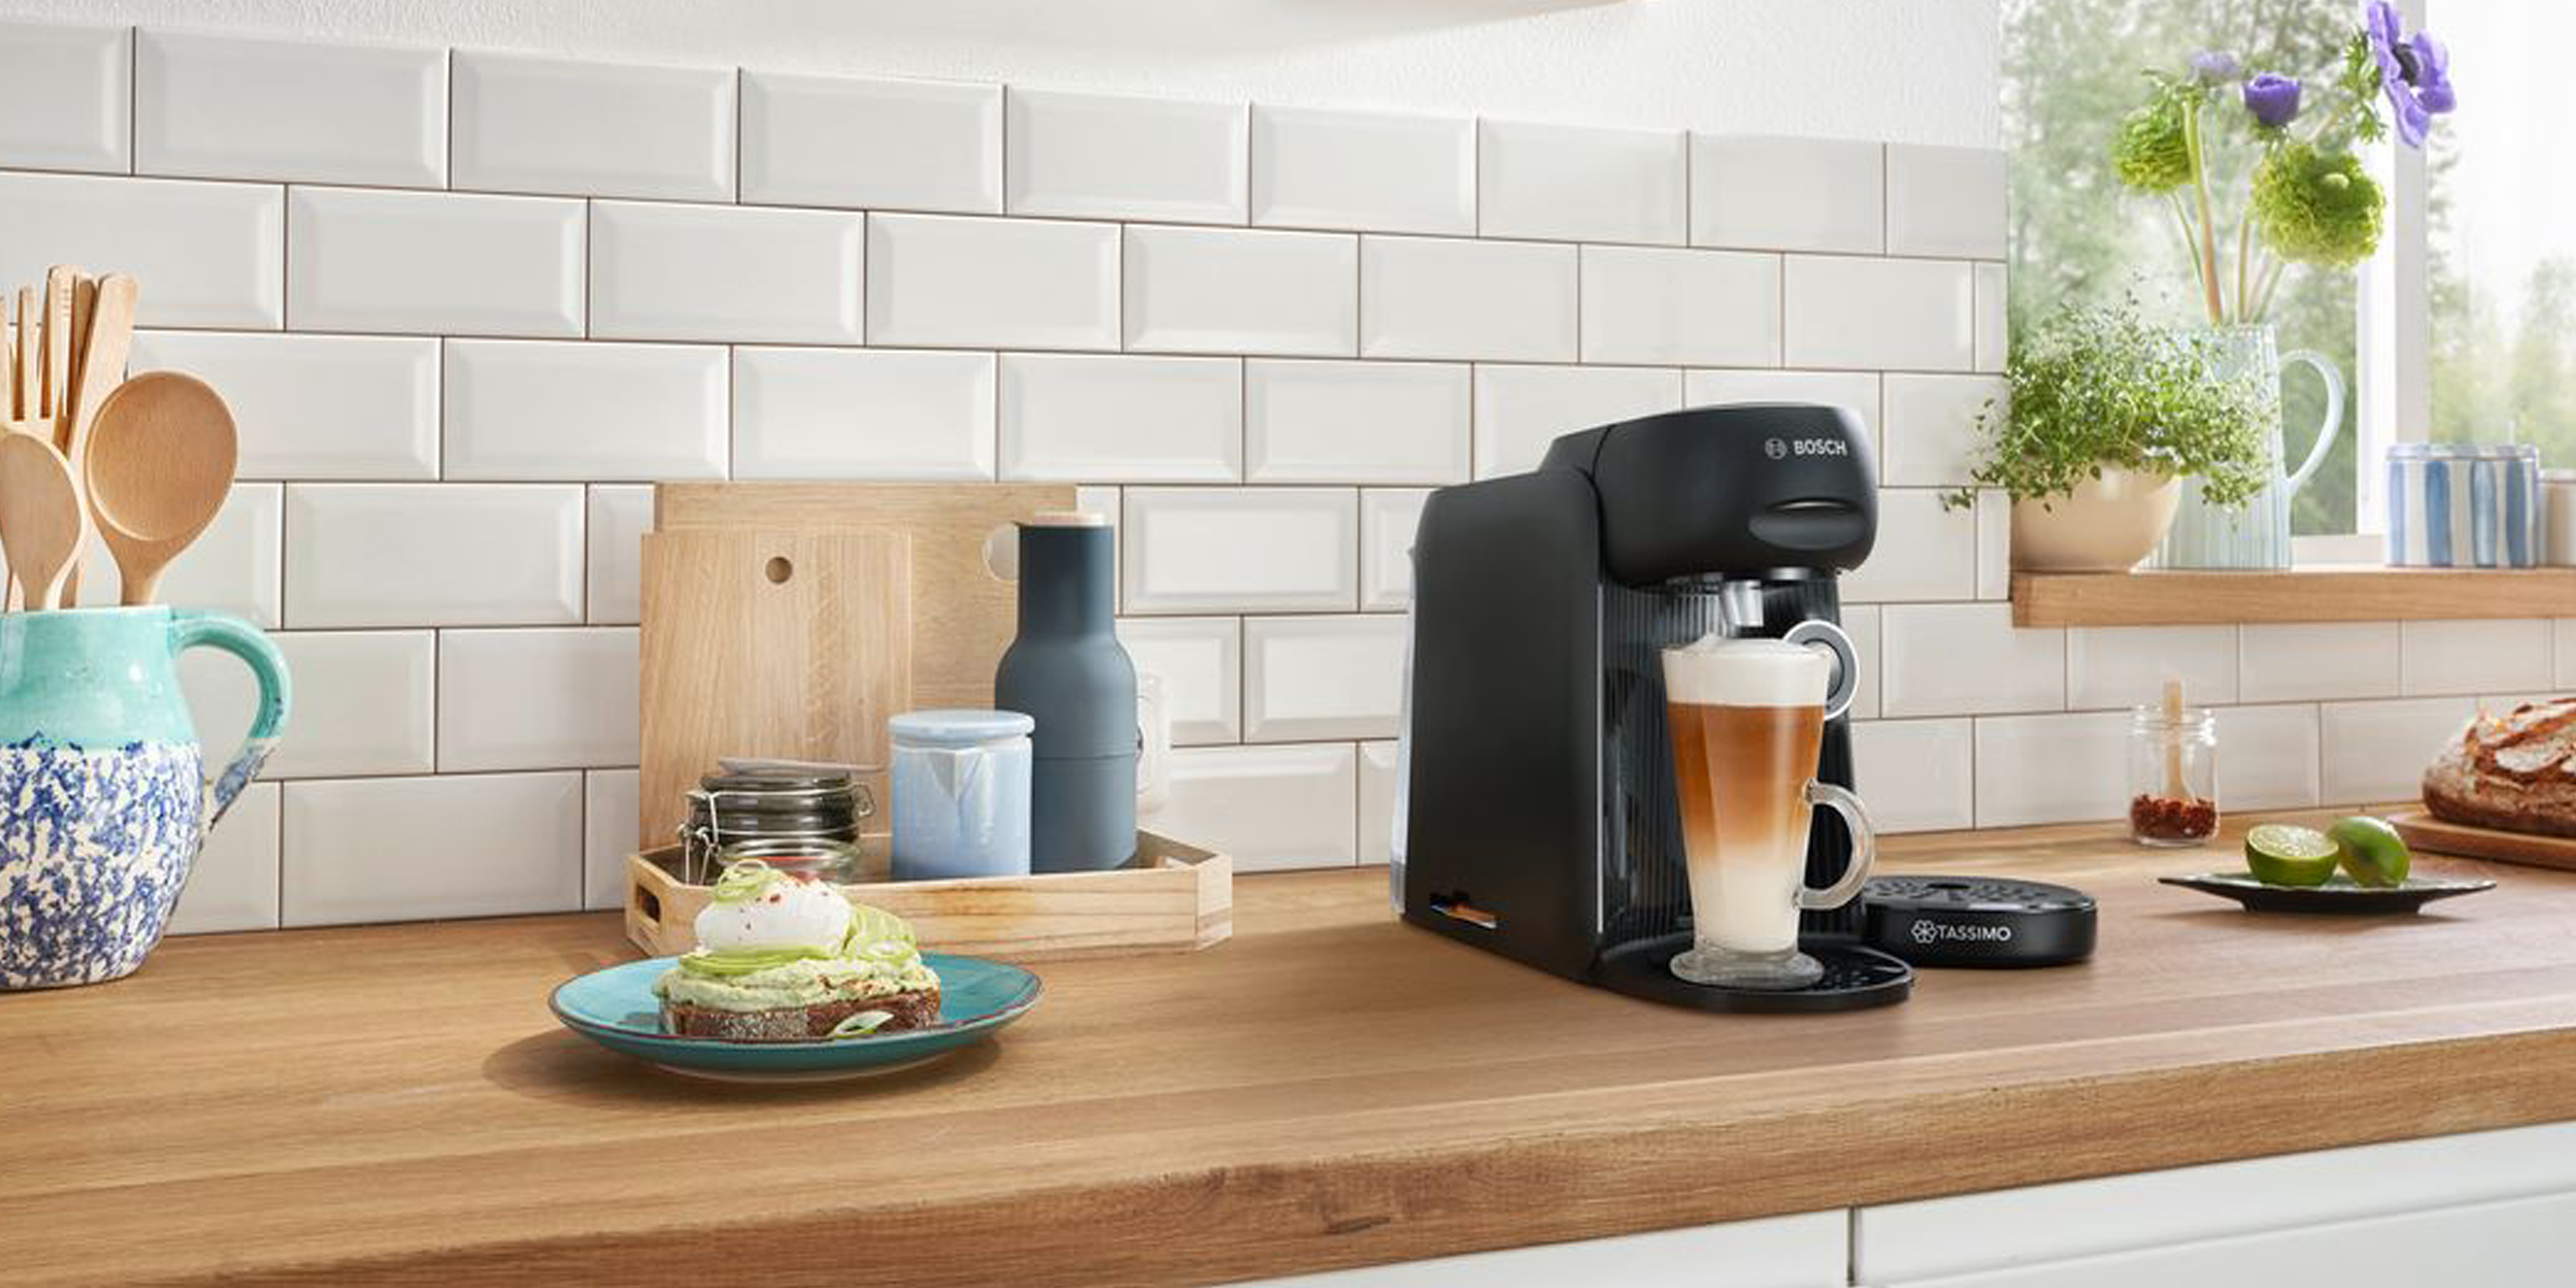 The Tassimo Bosch coffee machine with 3000 5-star reviews is under